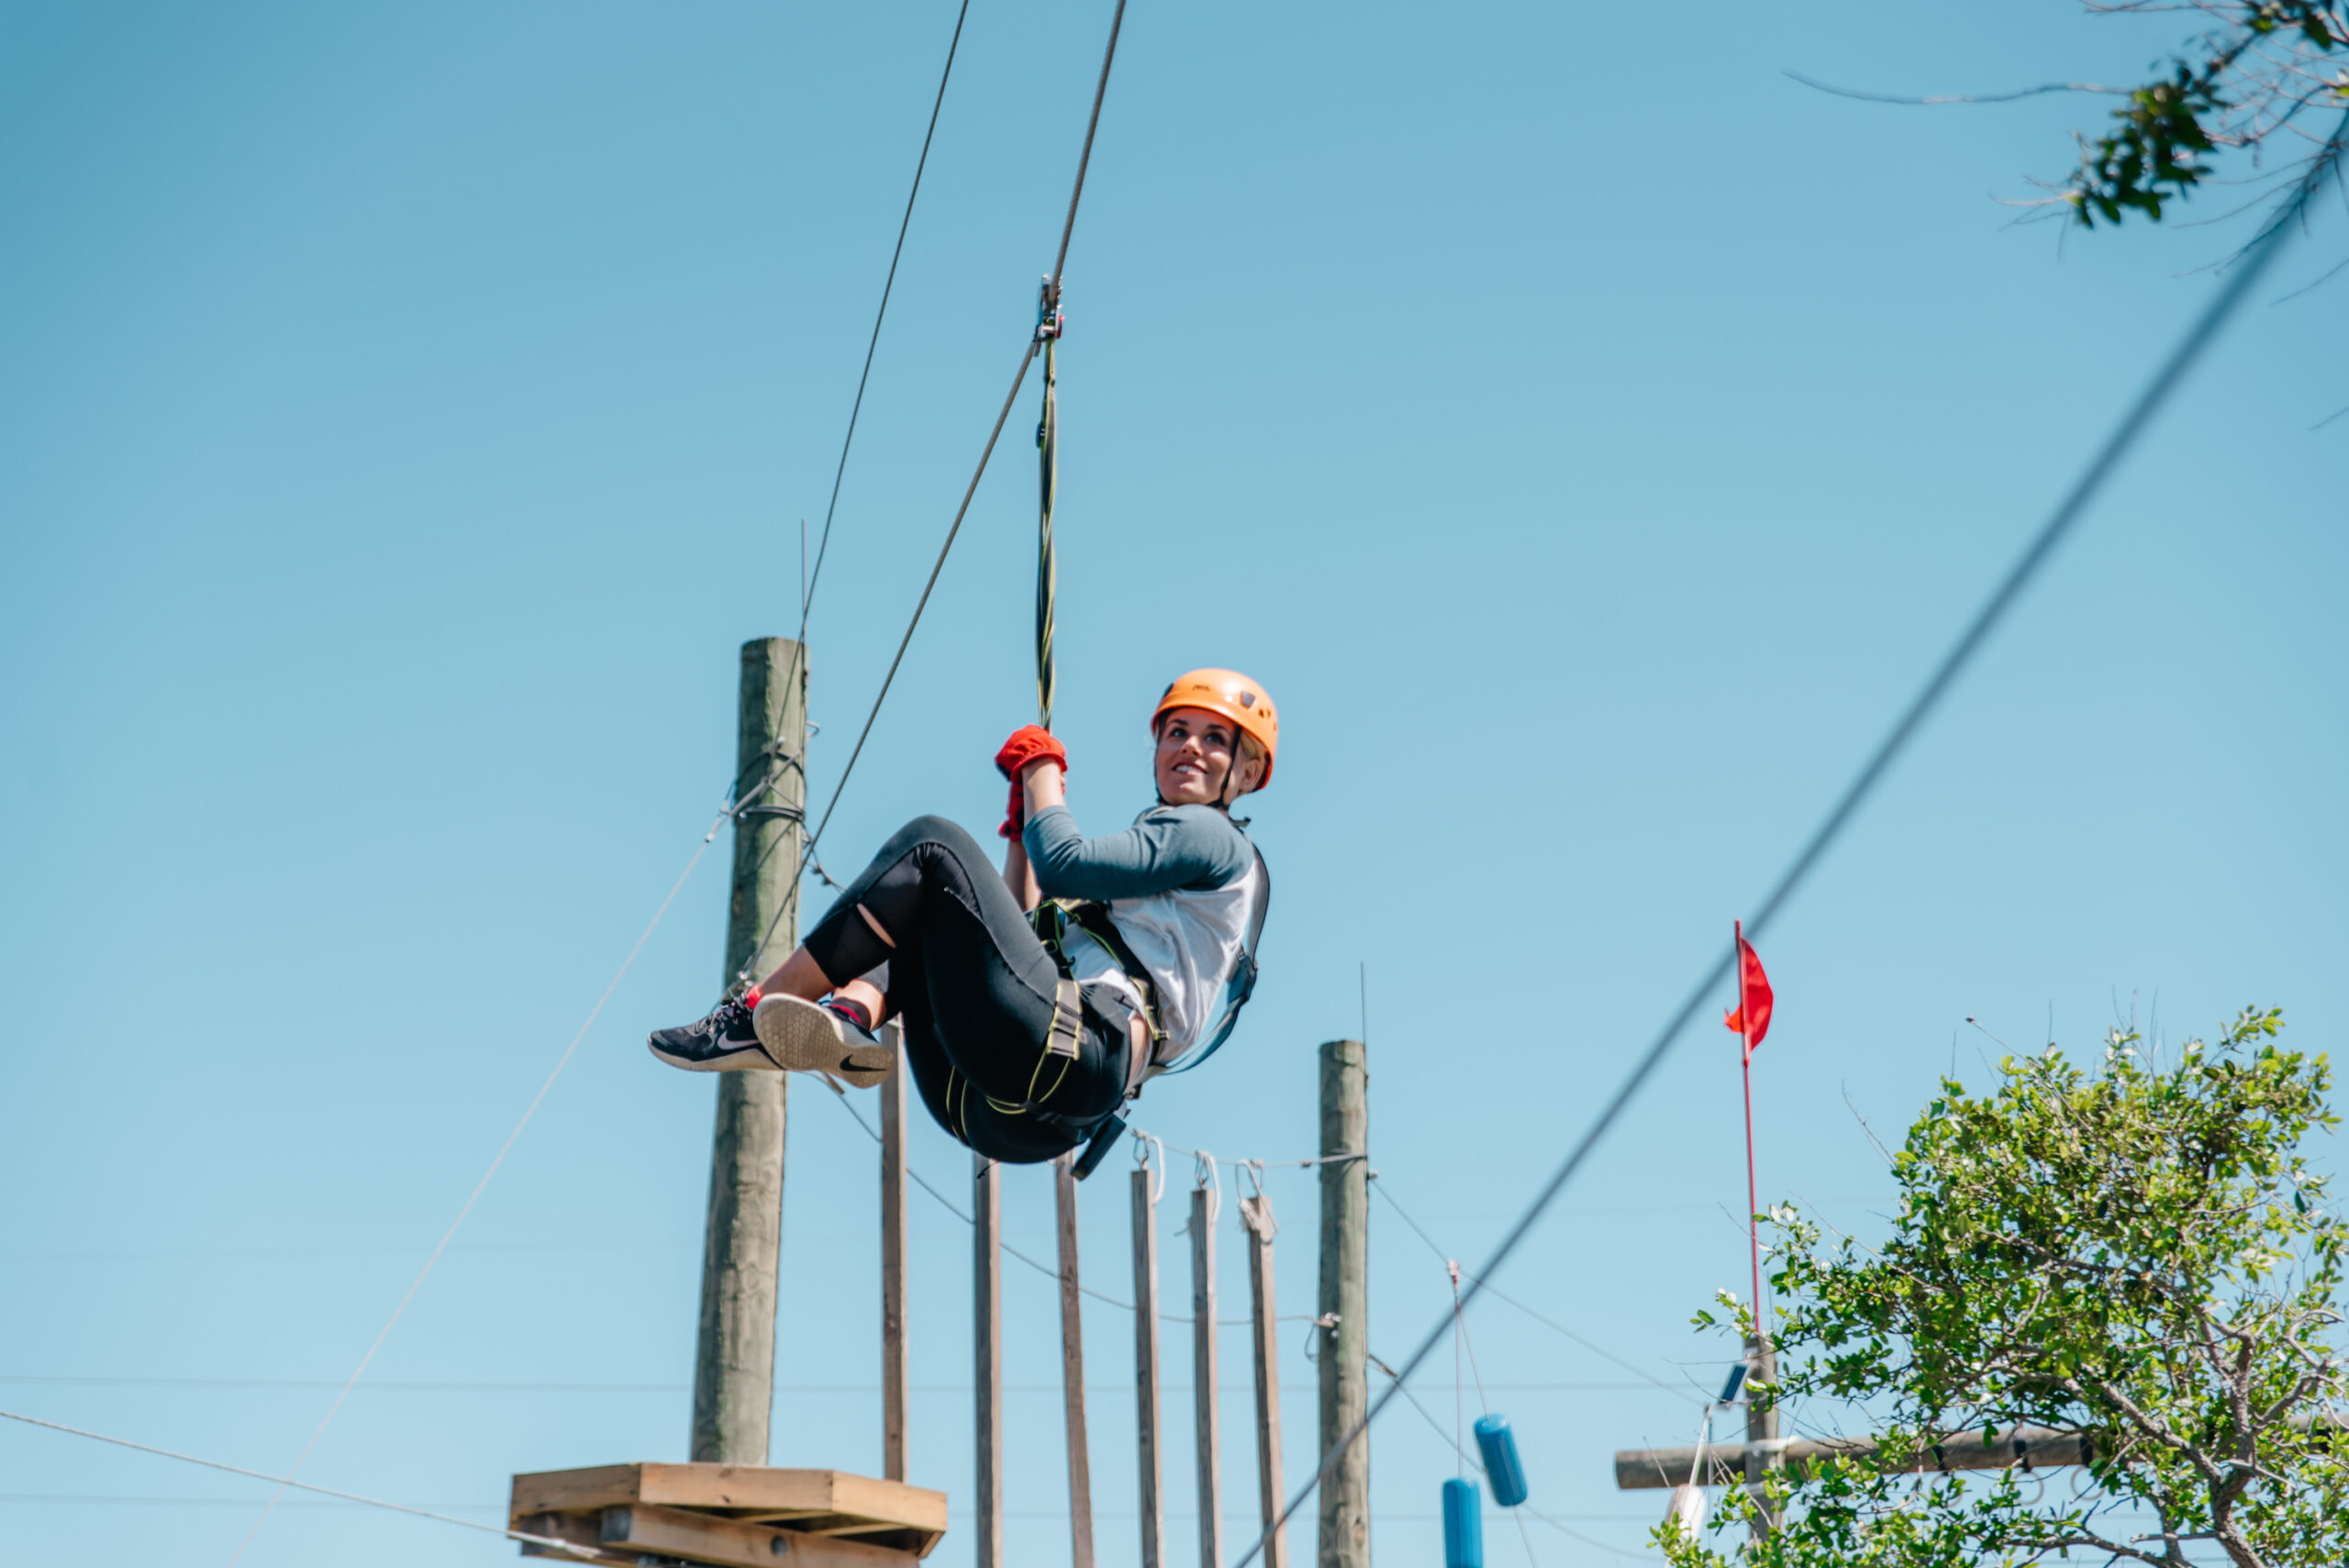 Get a birds-eye view and meet the challenge at Cocoa Beach Aerial Adventures